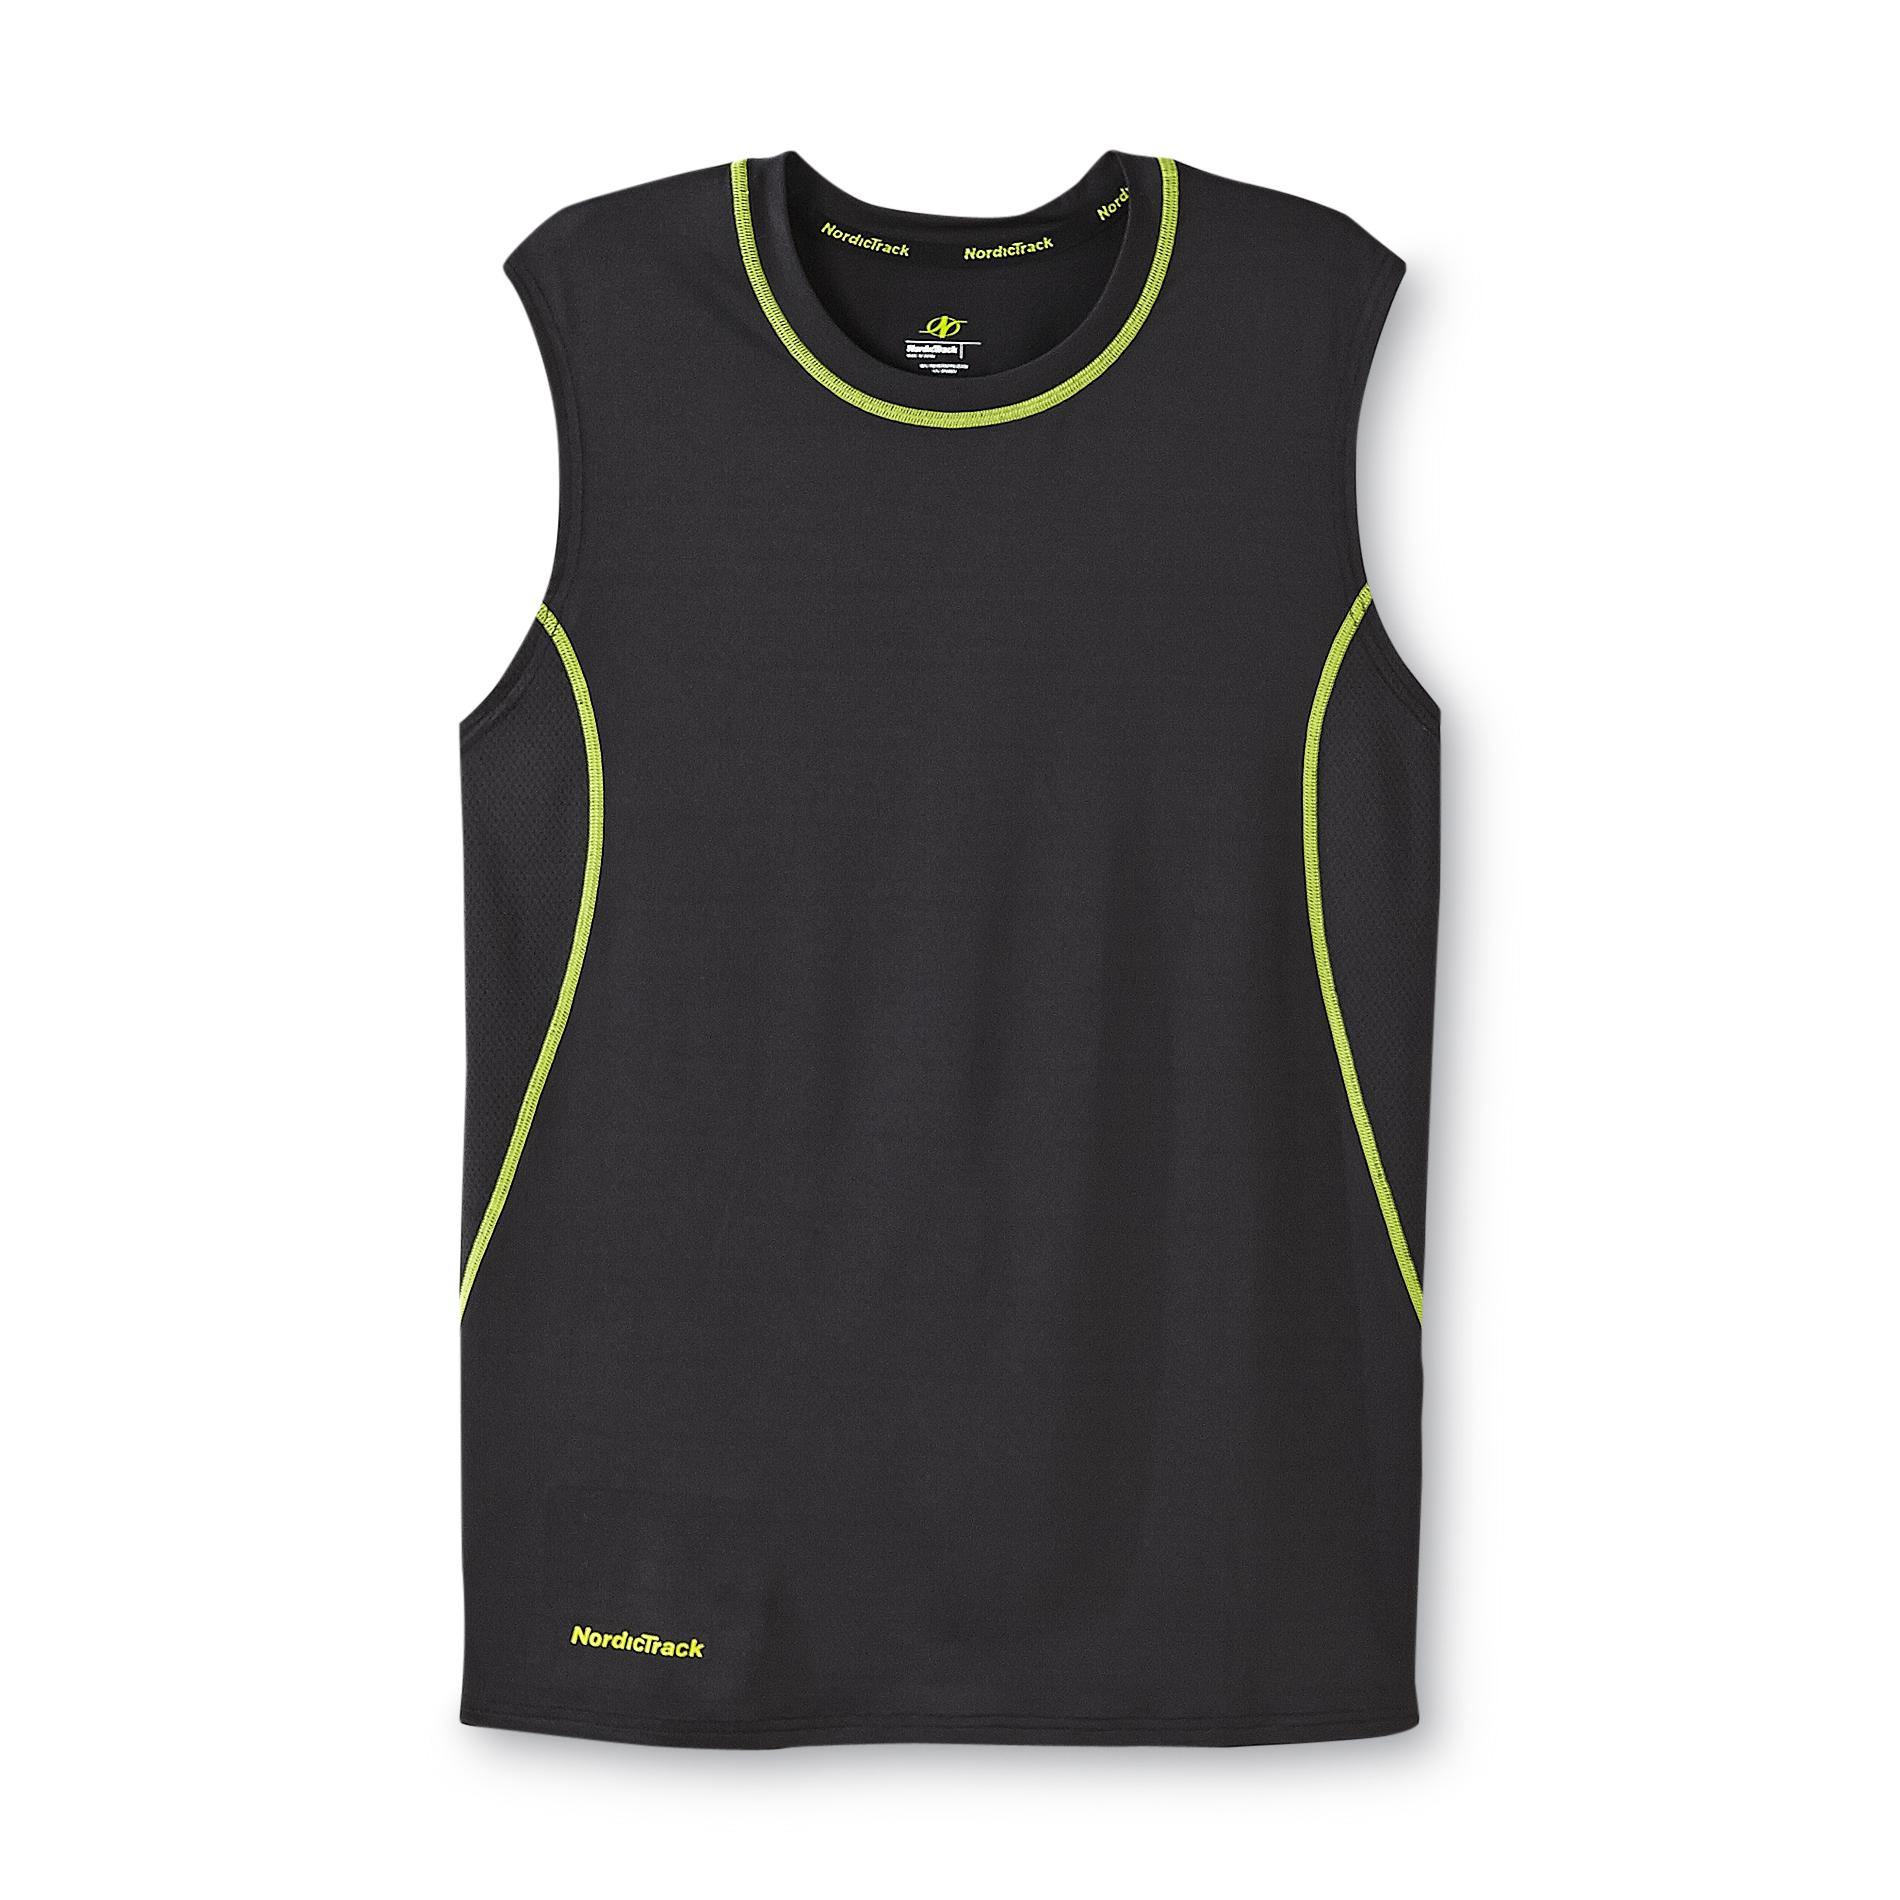 NordicTrack Men's Athletic Muscle Shirt